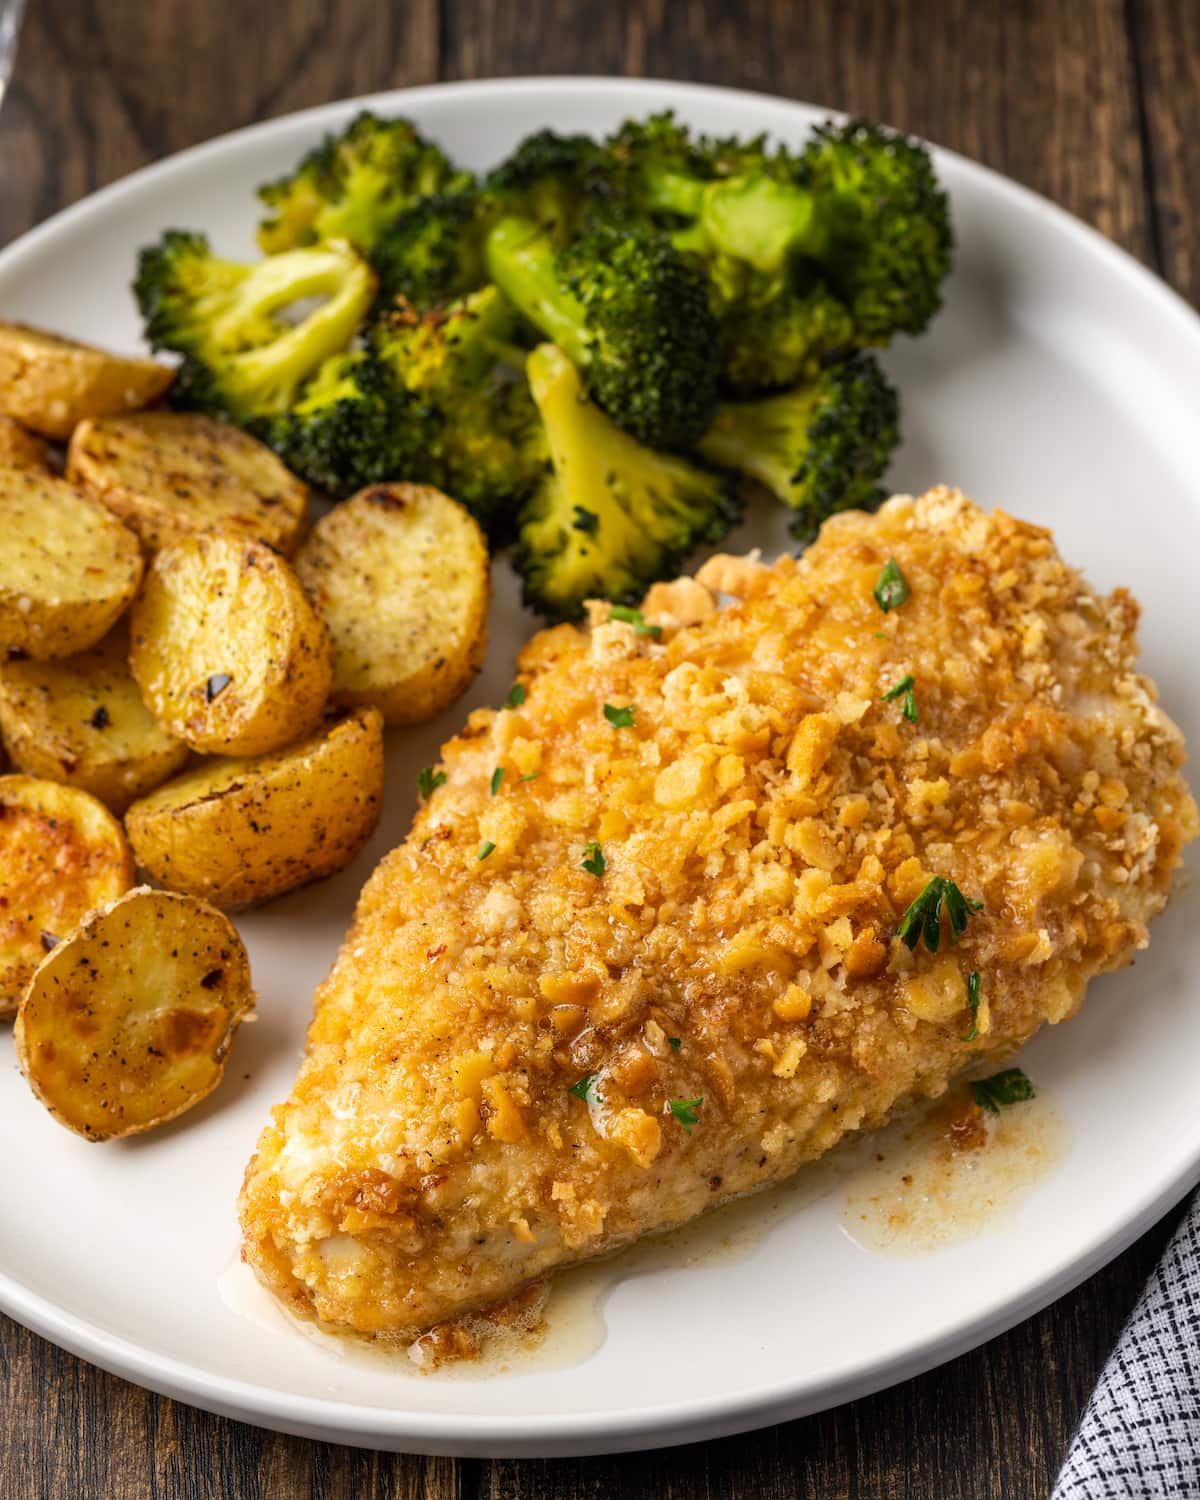 Baked chicken breast on a plate with potatoes and broccoli.